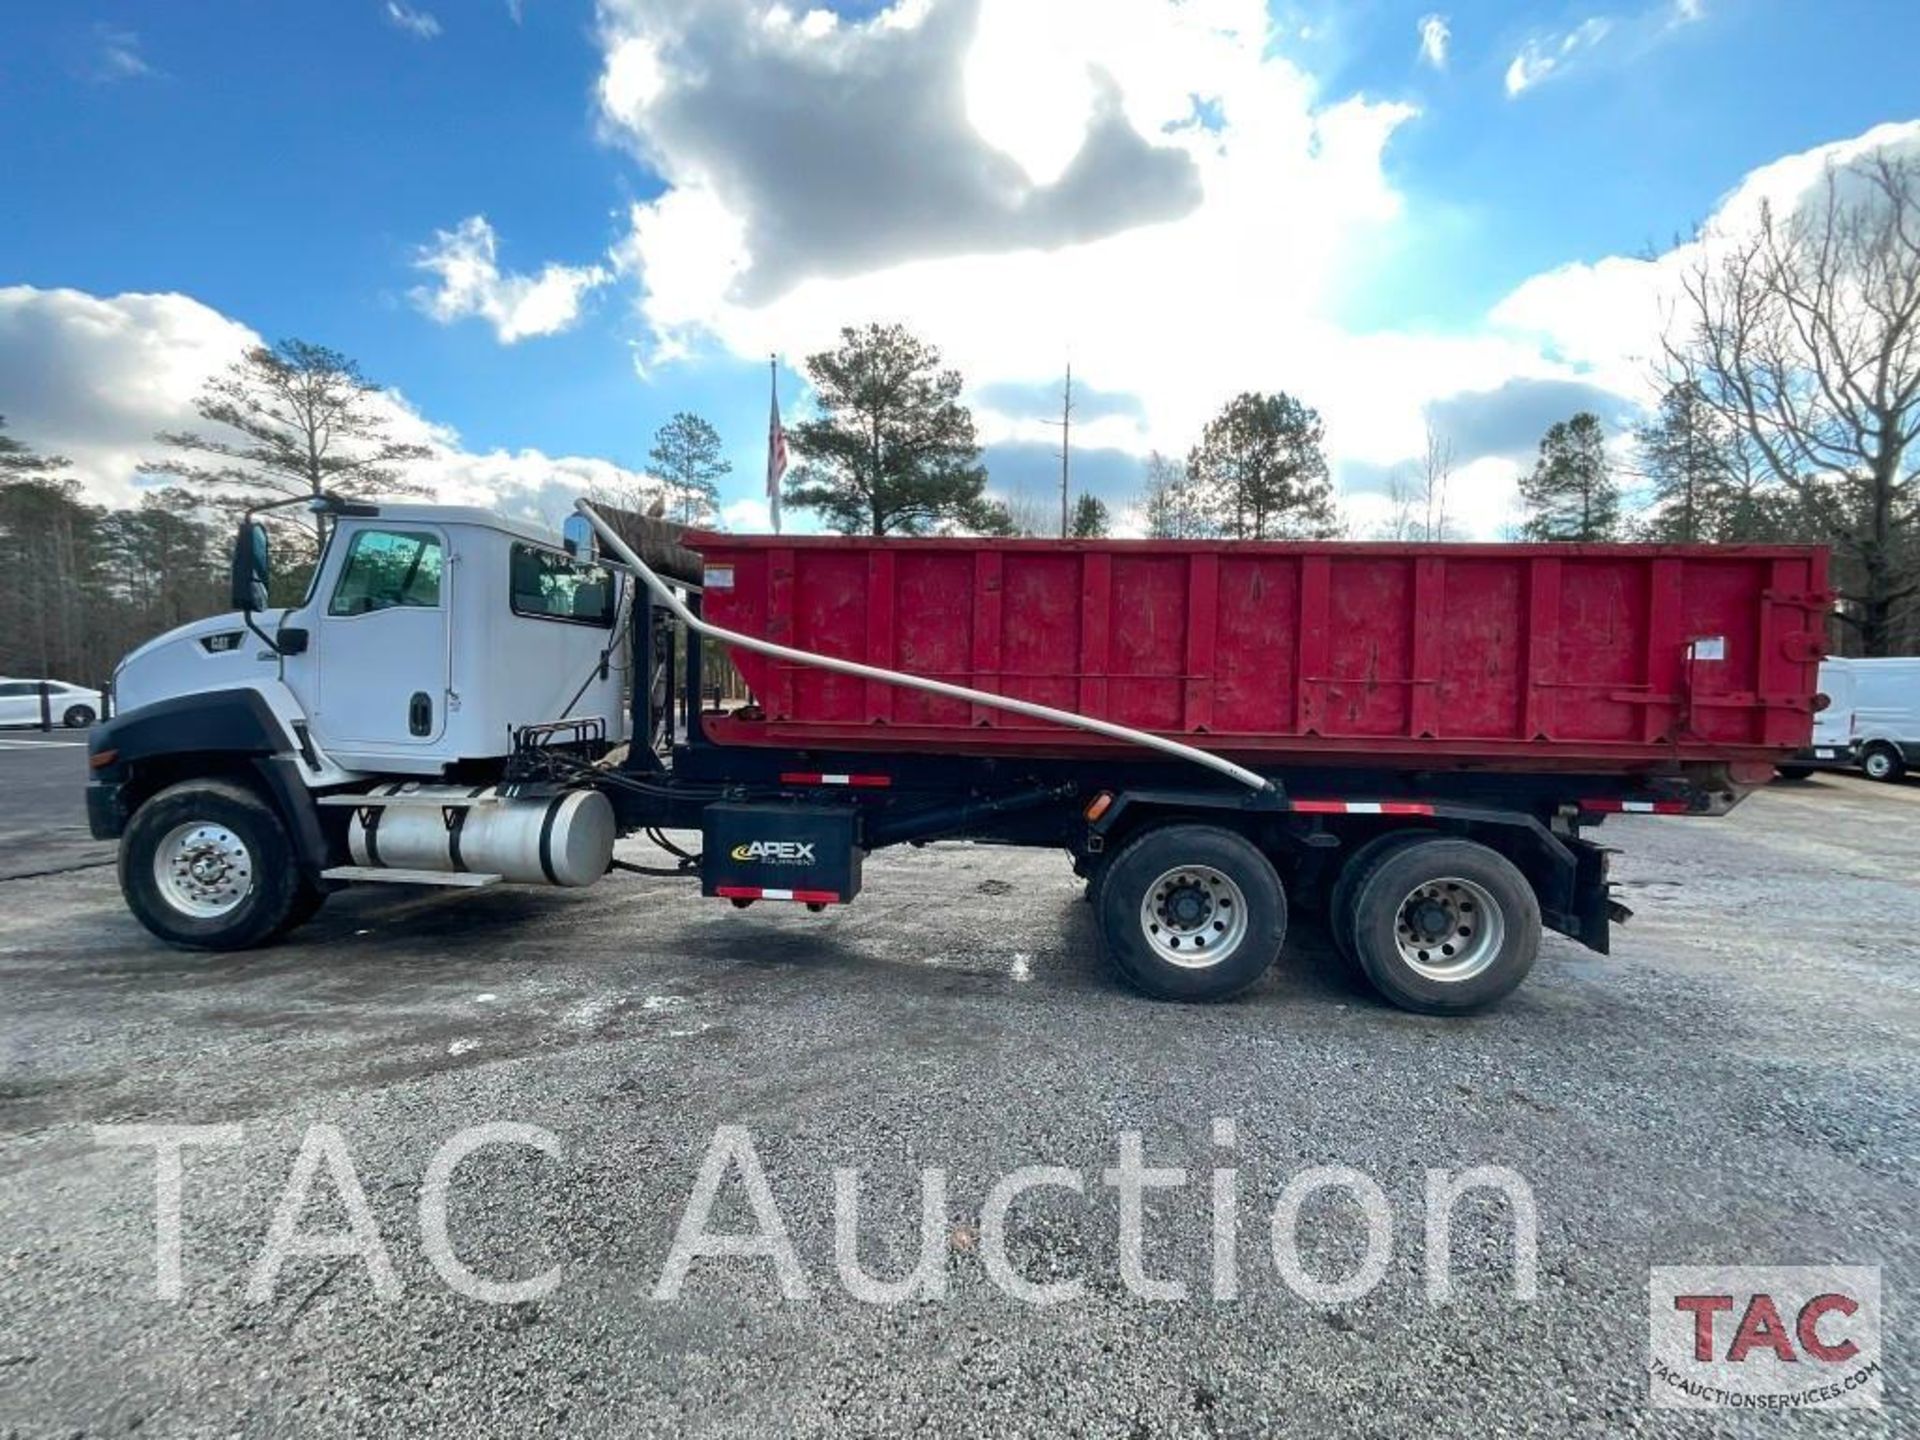 2012 CAT CT660S Roll-Off Truck W/ 20yd Dumpster - Image 12 of 148